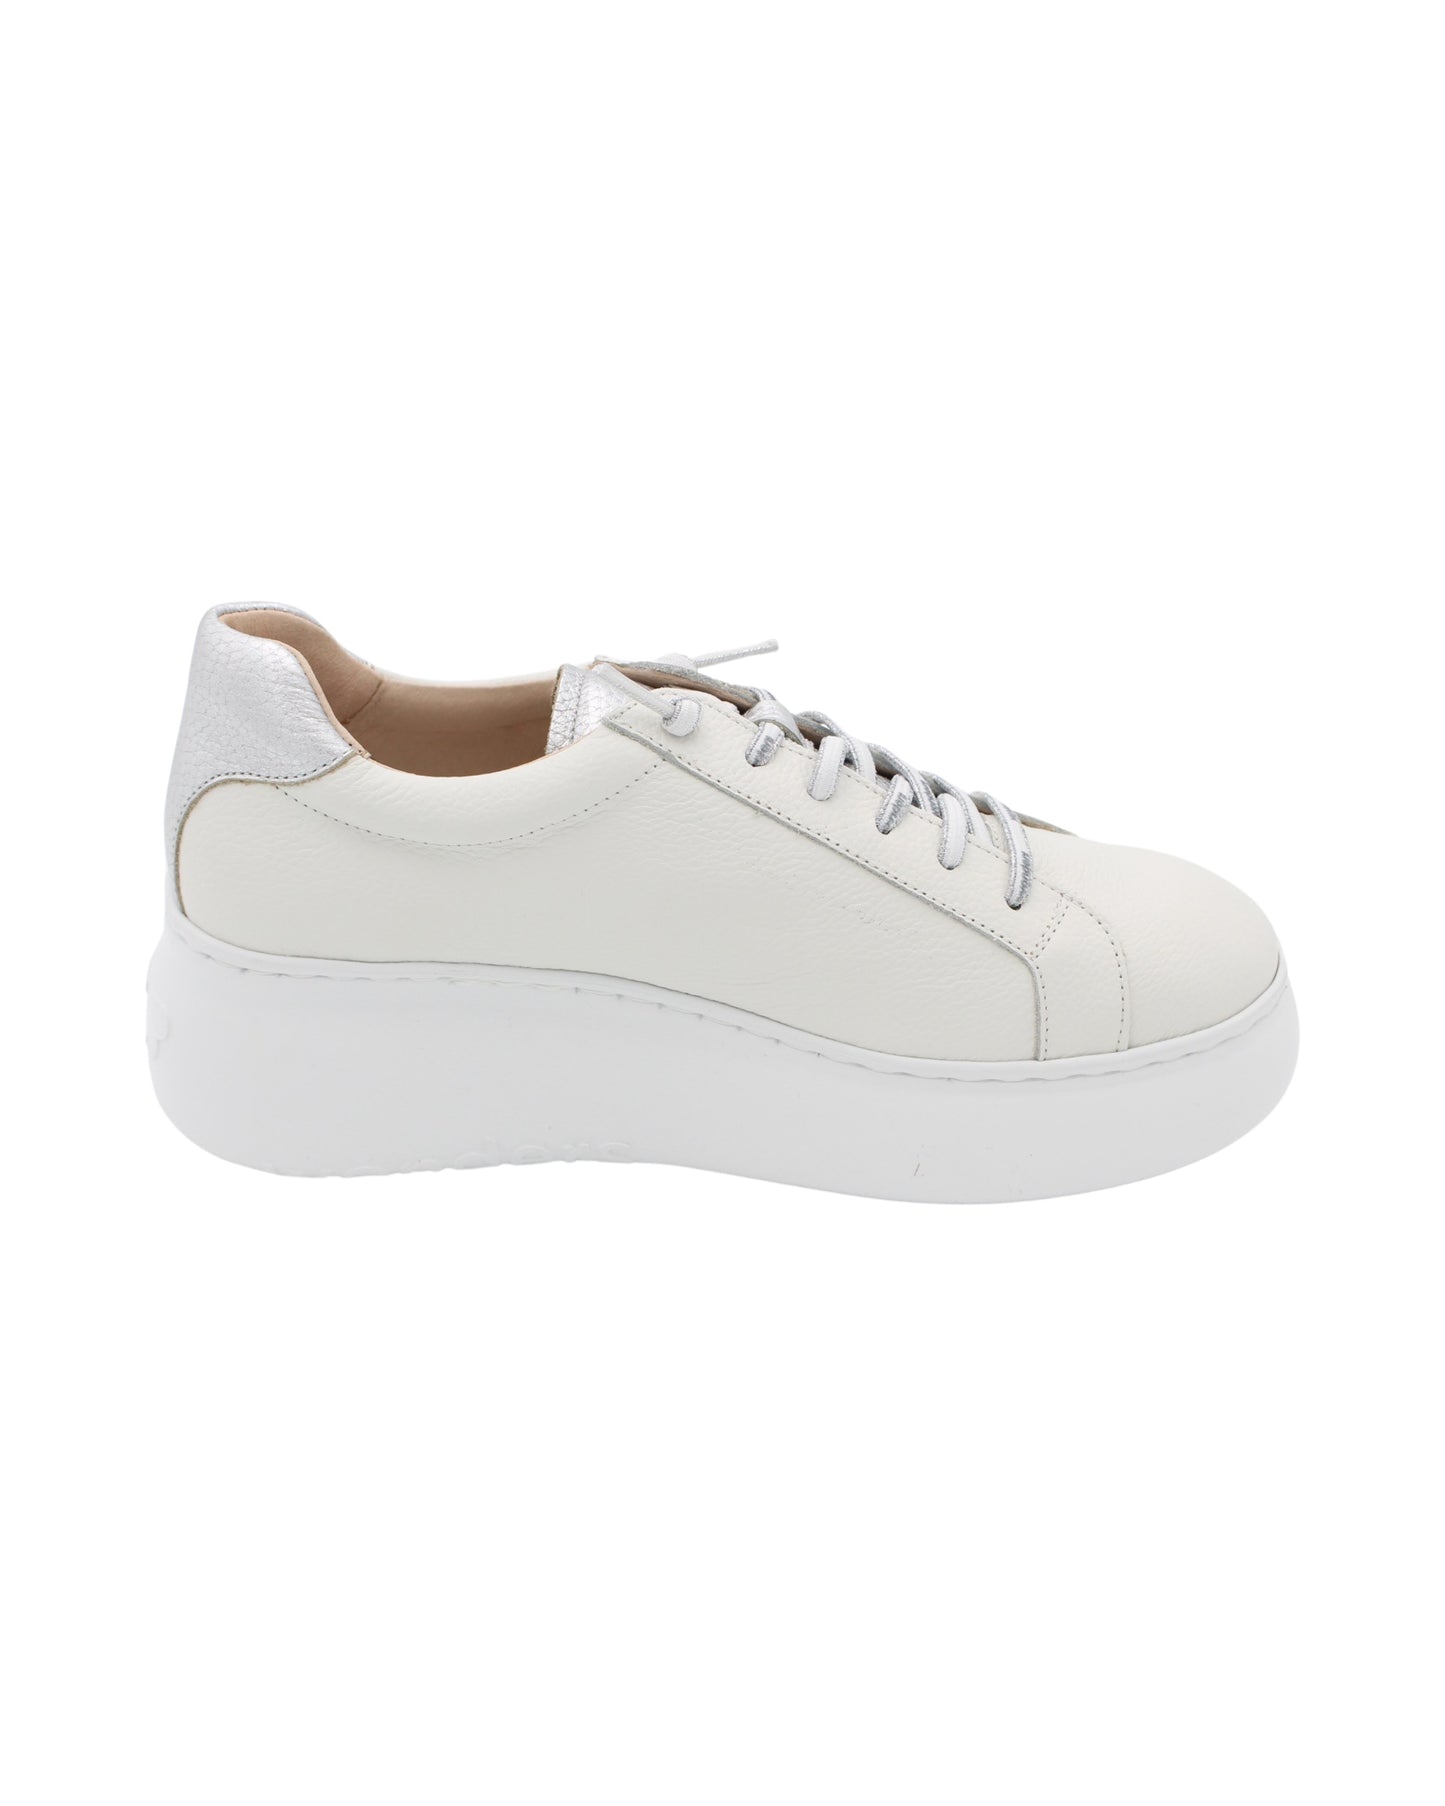 Wonders - Ladies Shoes Trainers White, Silver (1900)